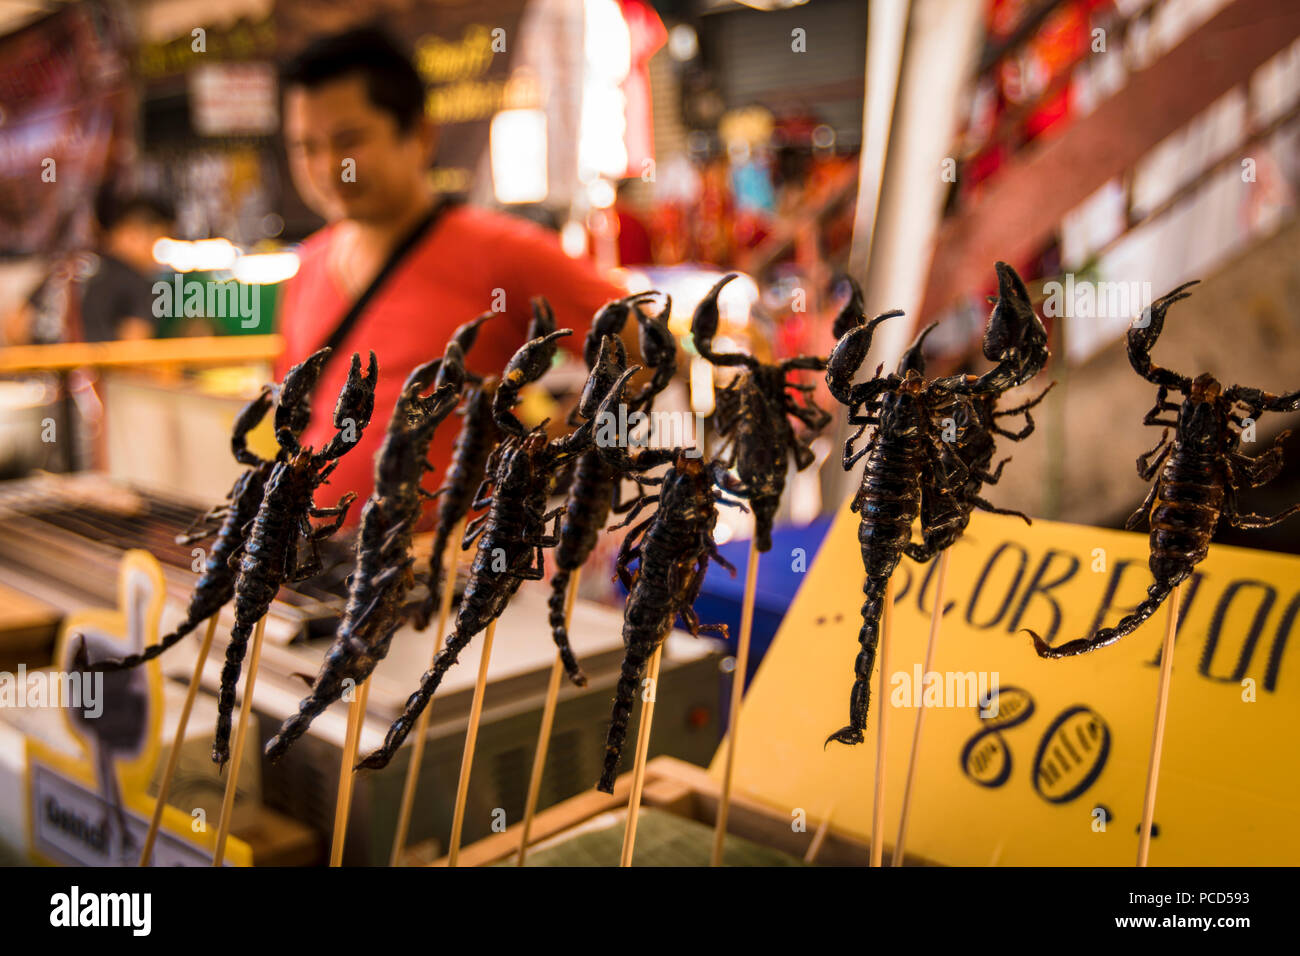 Scorpions for sale in Chinatown, Chiang Mai, Thailand, Southeast Asia, Asia Stock Photo